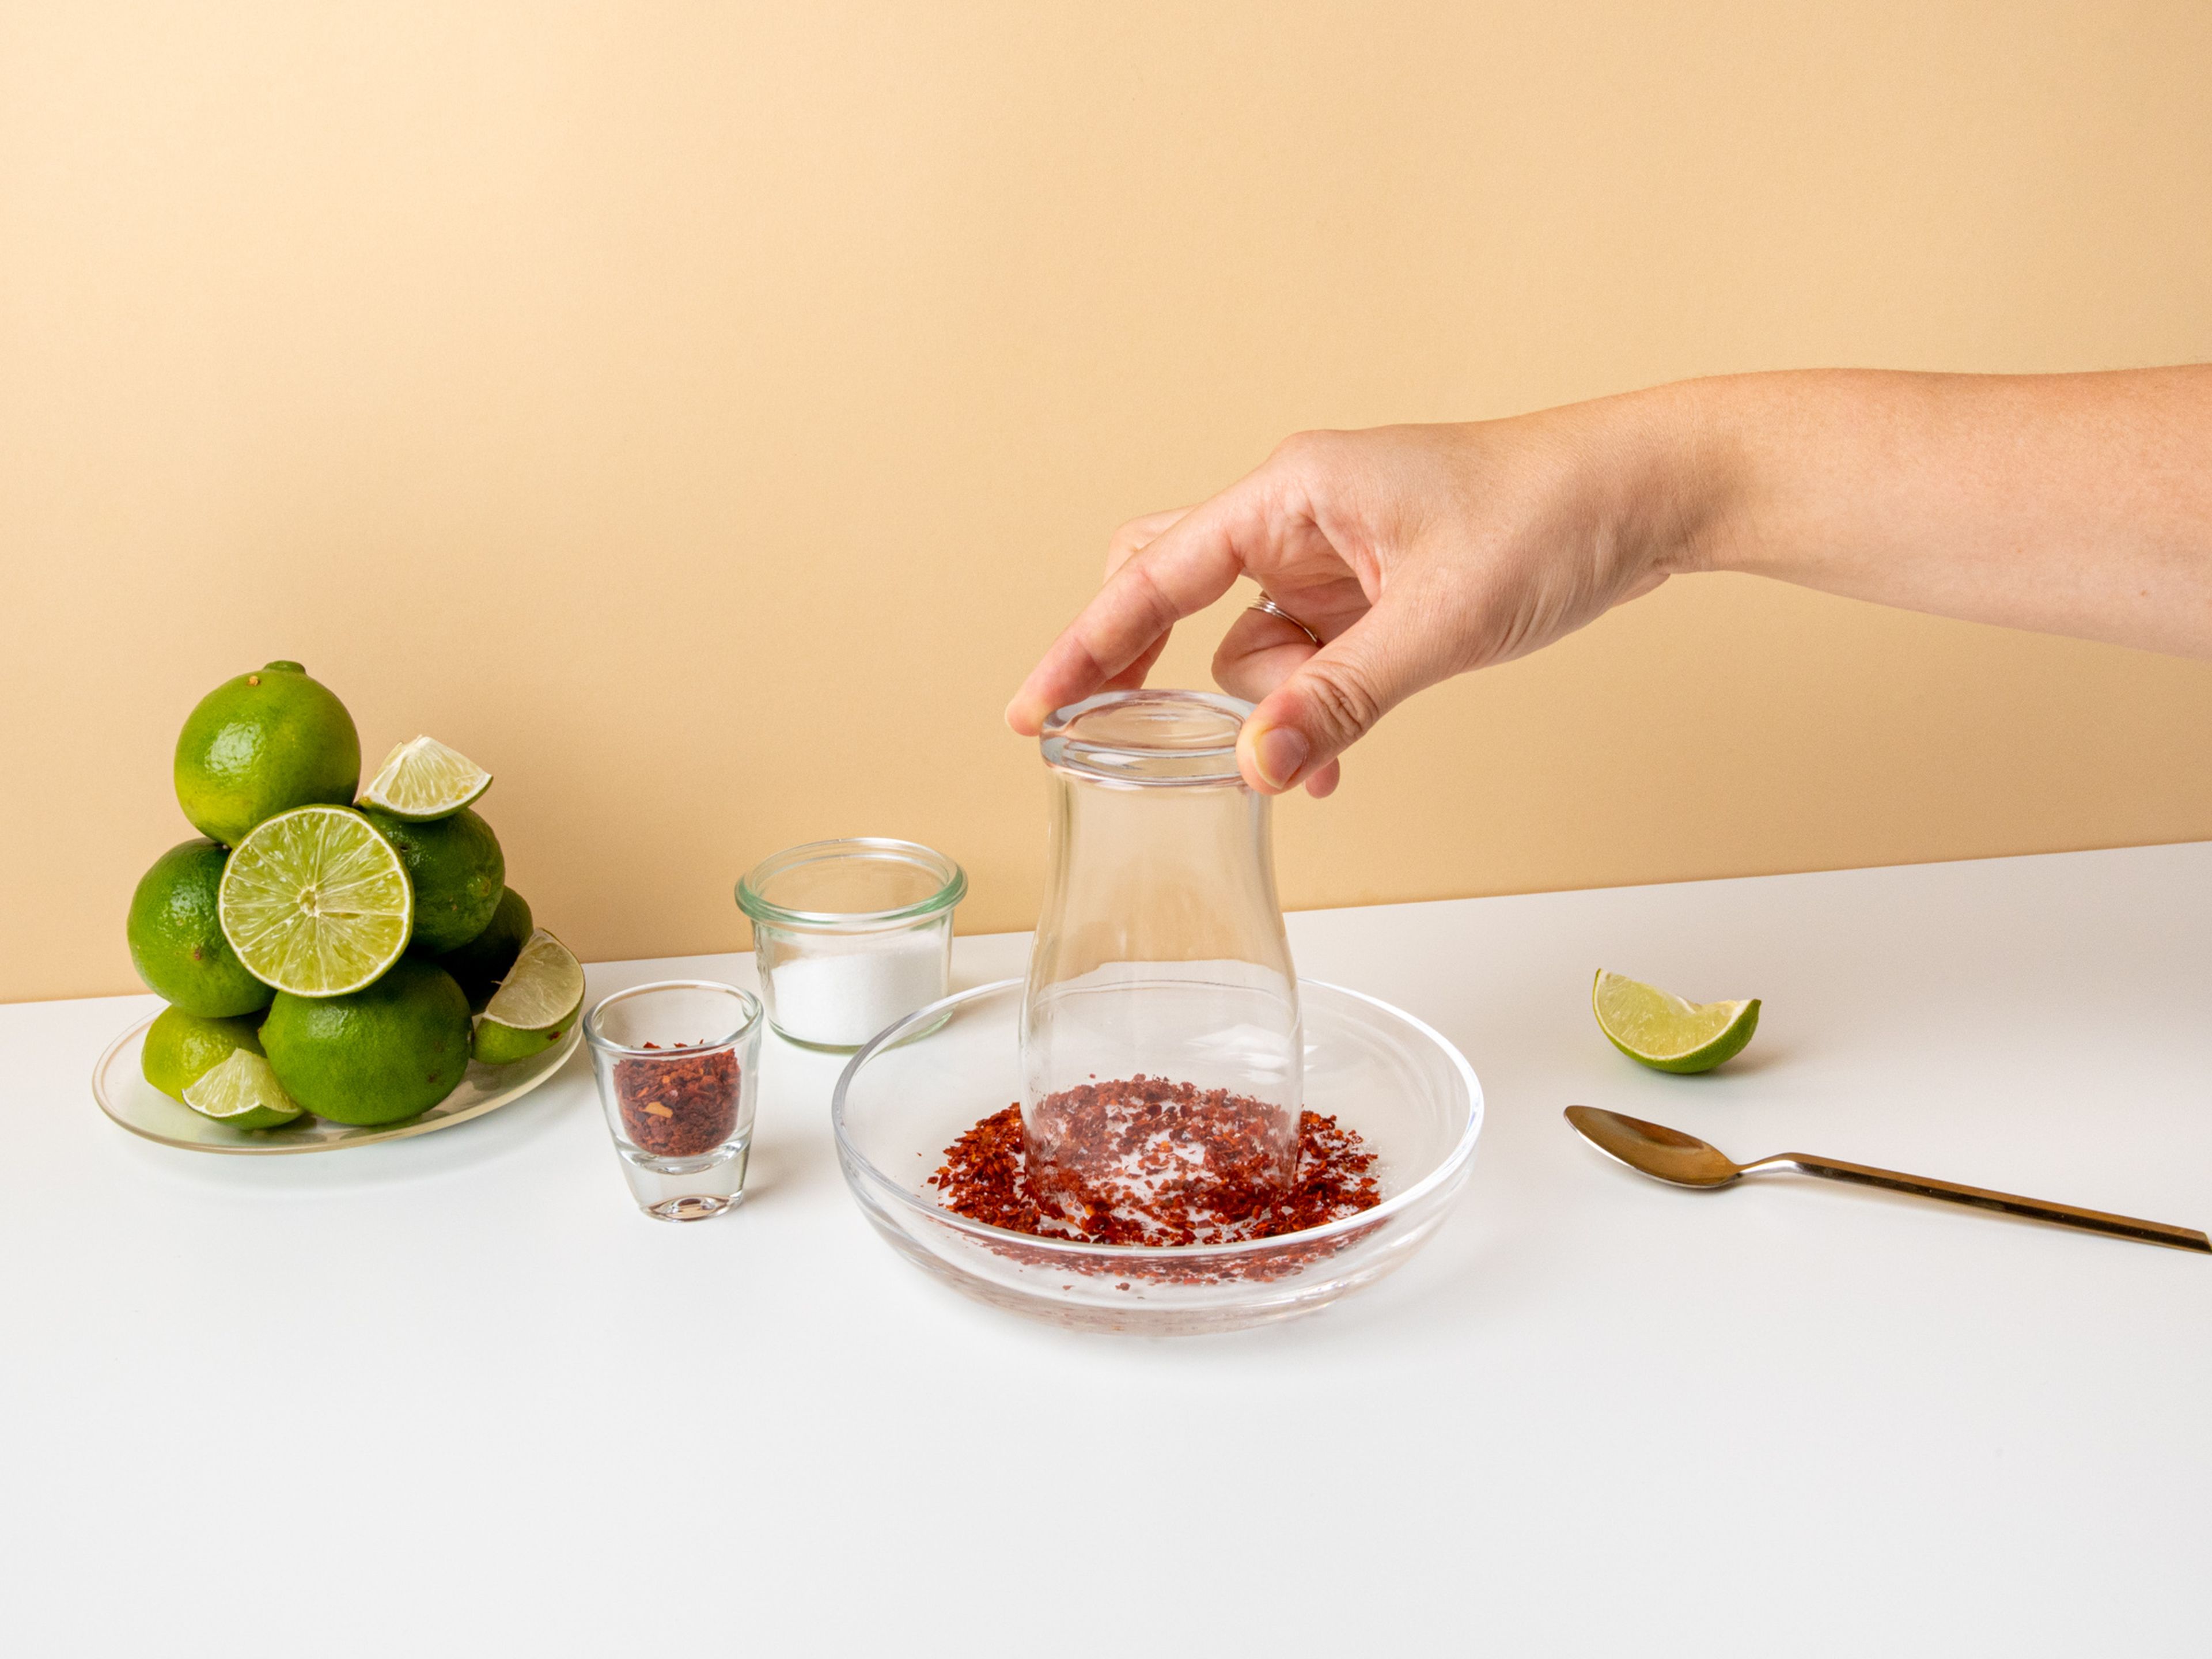 Add chili flakes, sugar, and salt to a small plate. Mix well. Halve one of the limes and rub one half around the rim of the glass. Turn glass upside down and swivel it so the rim becomes coated in the chili mixture.